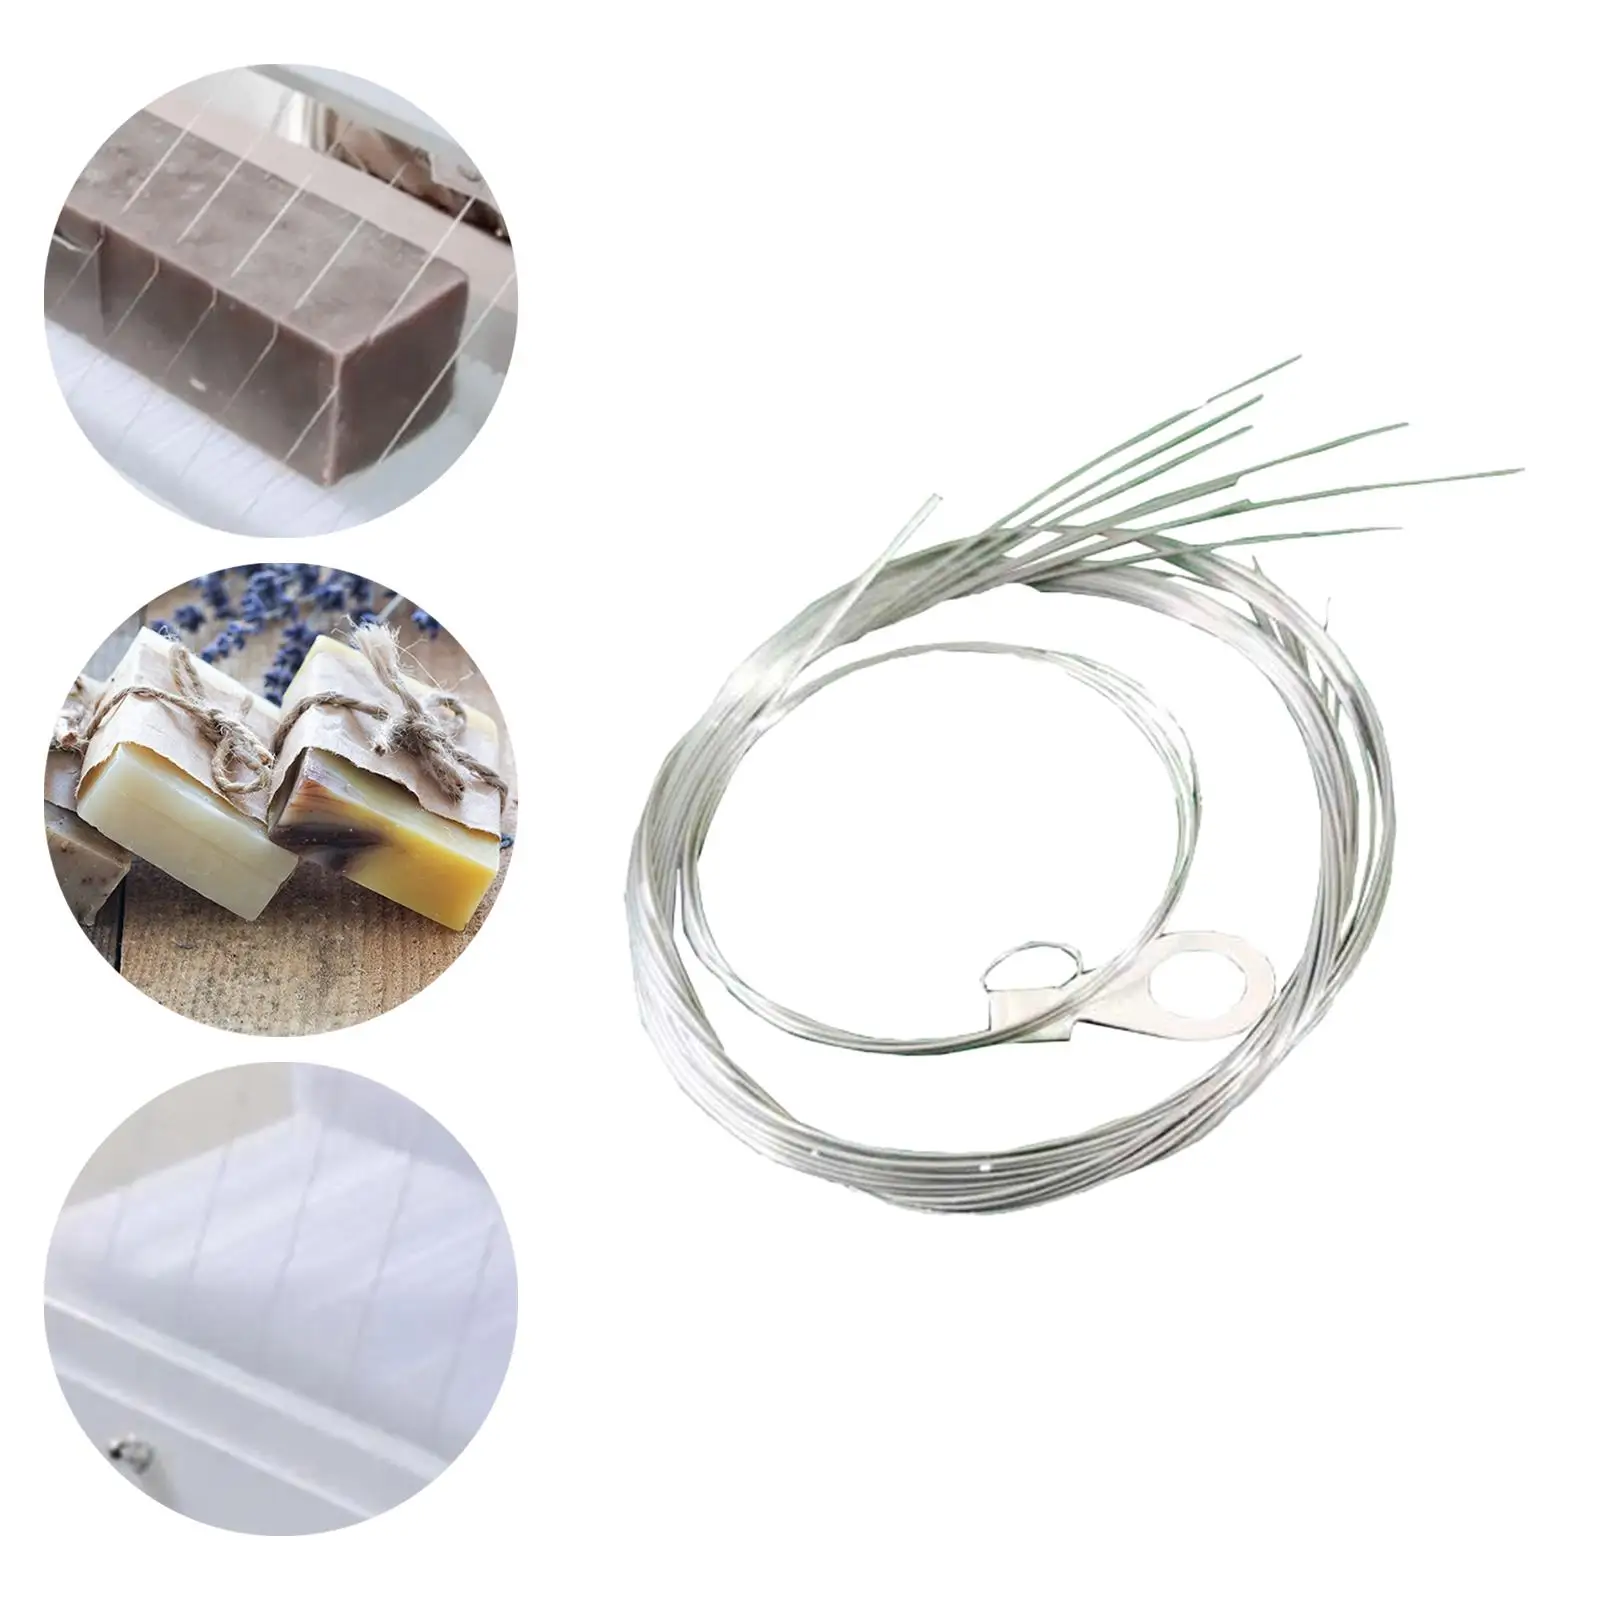 9x Stainless Steel Wires Cutting with Loop Soap Cutter Wires for Chocolate Handmade Soap Cutter Soap Machine Cake Butter